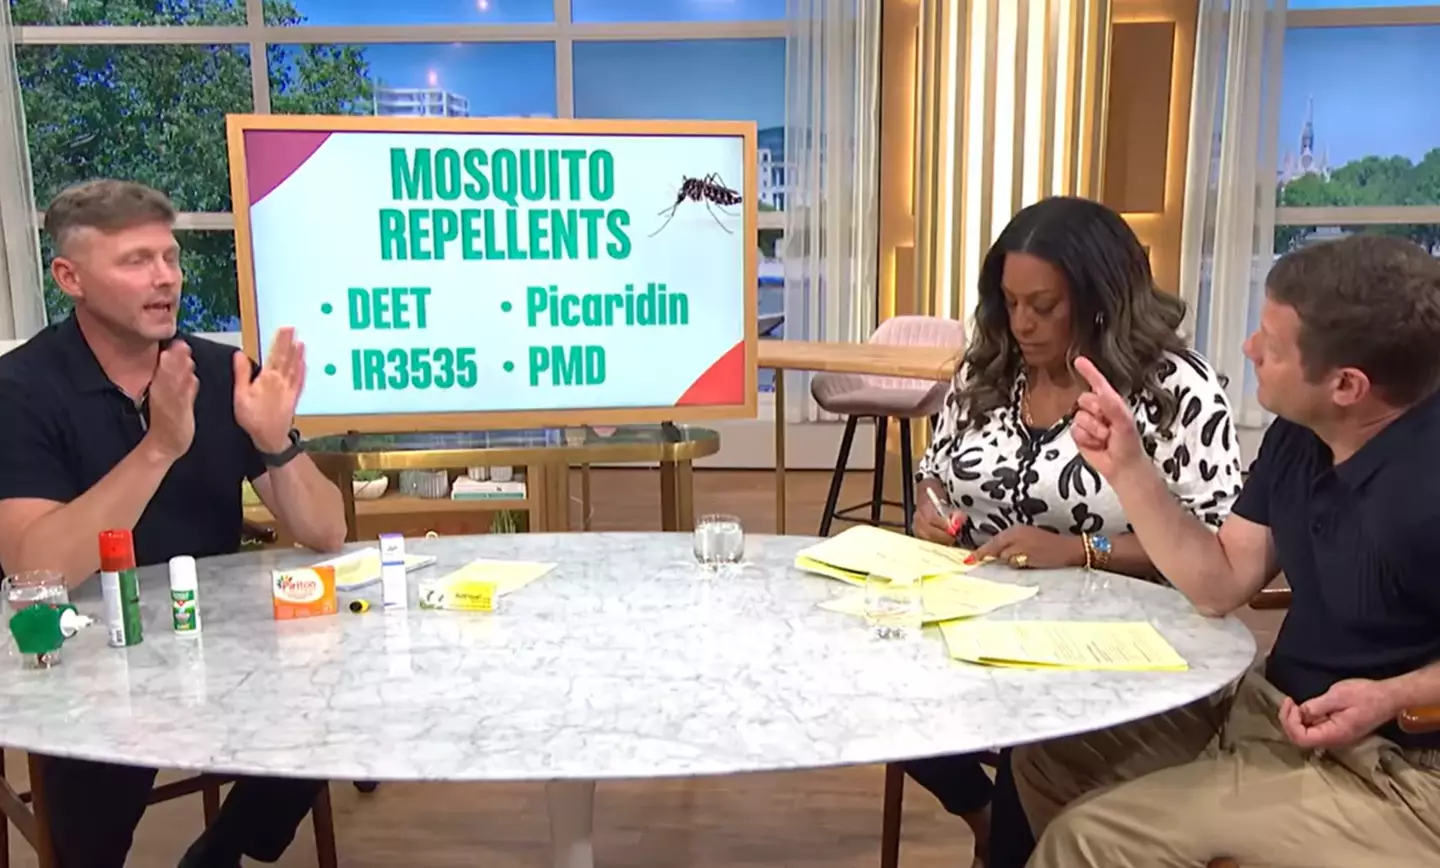 Professor James Logan told people how to keep mosquitoes away in the first place. (ITV)